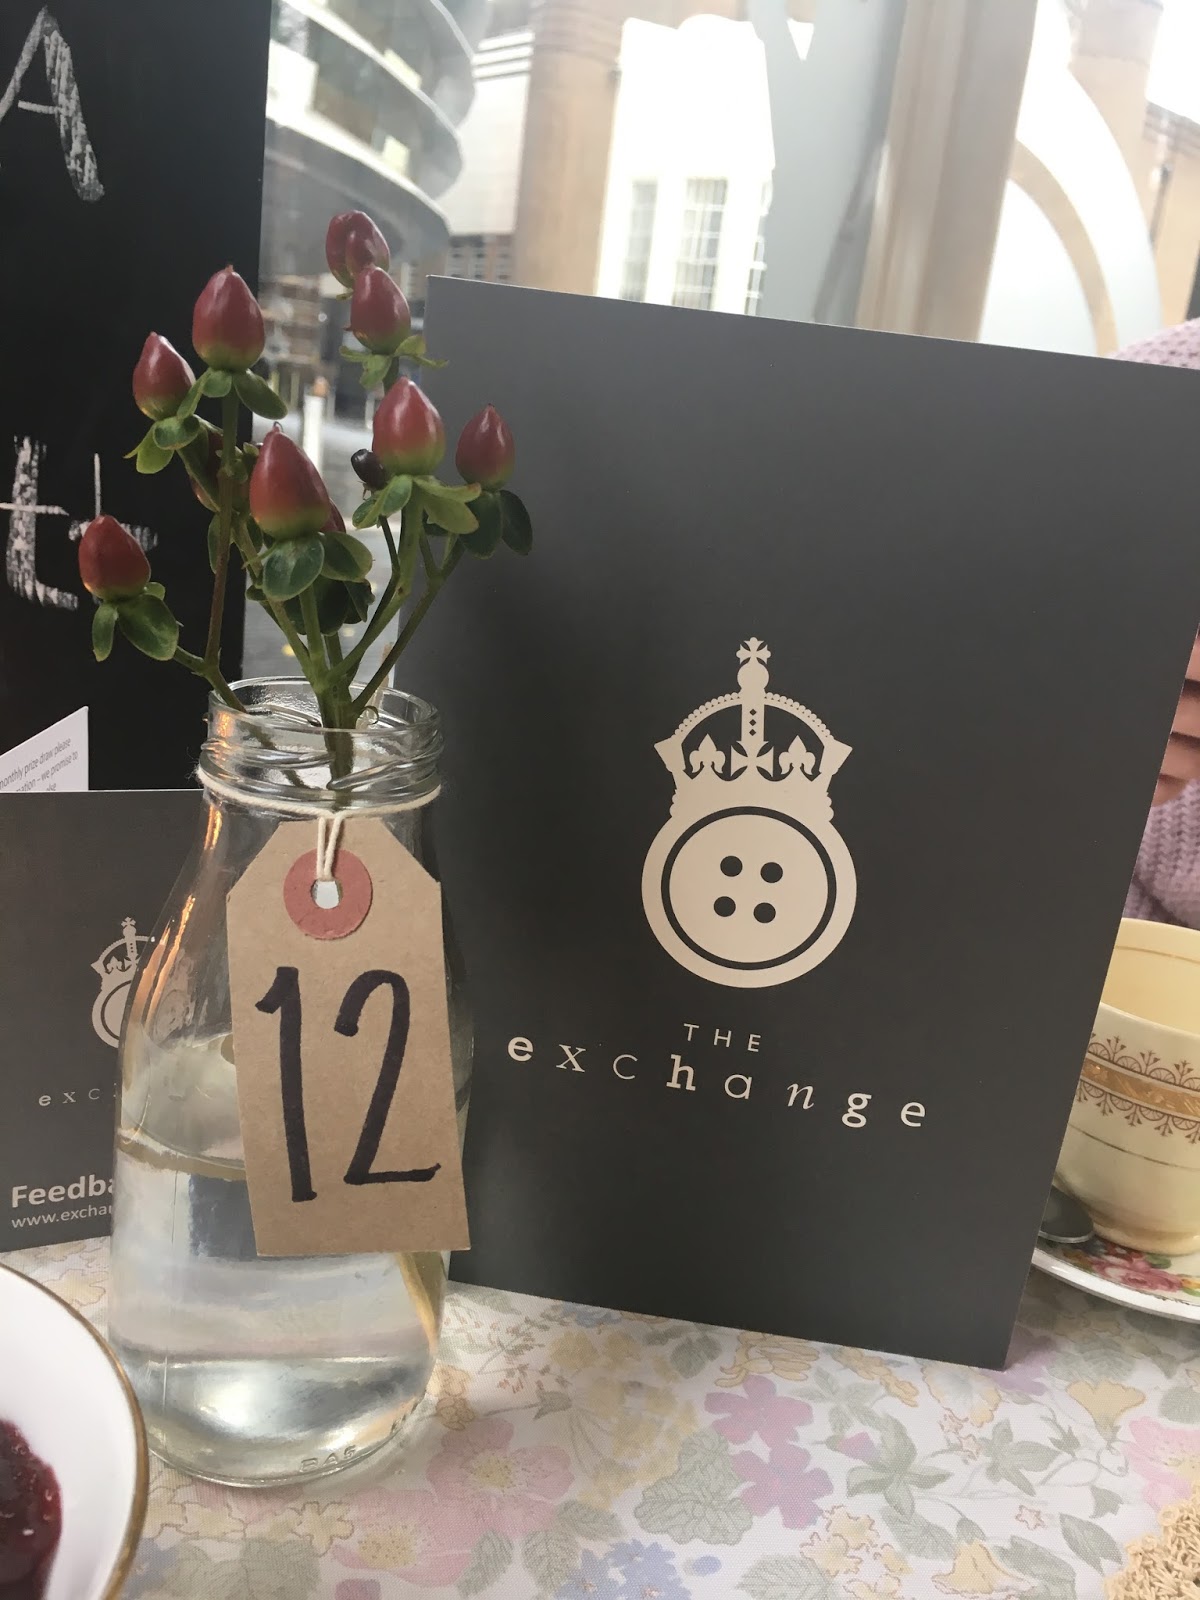 The Exchange Leicester Bottomless Sunday Afternoon tea Priceless Life of Mine over 40 lifestyle blog